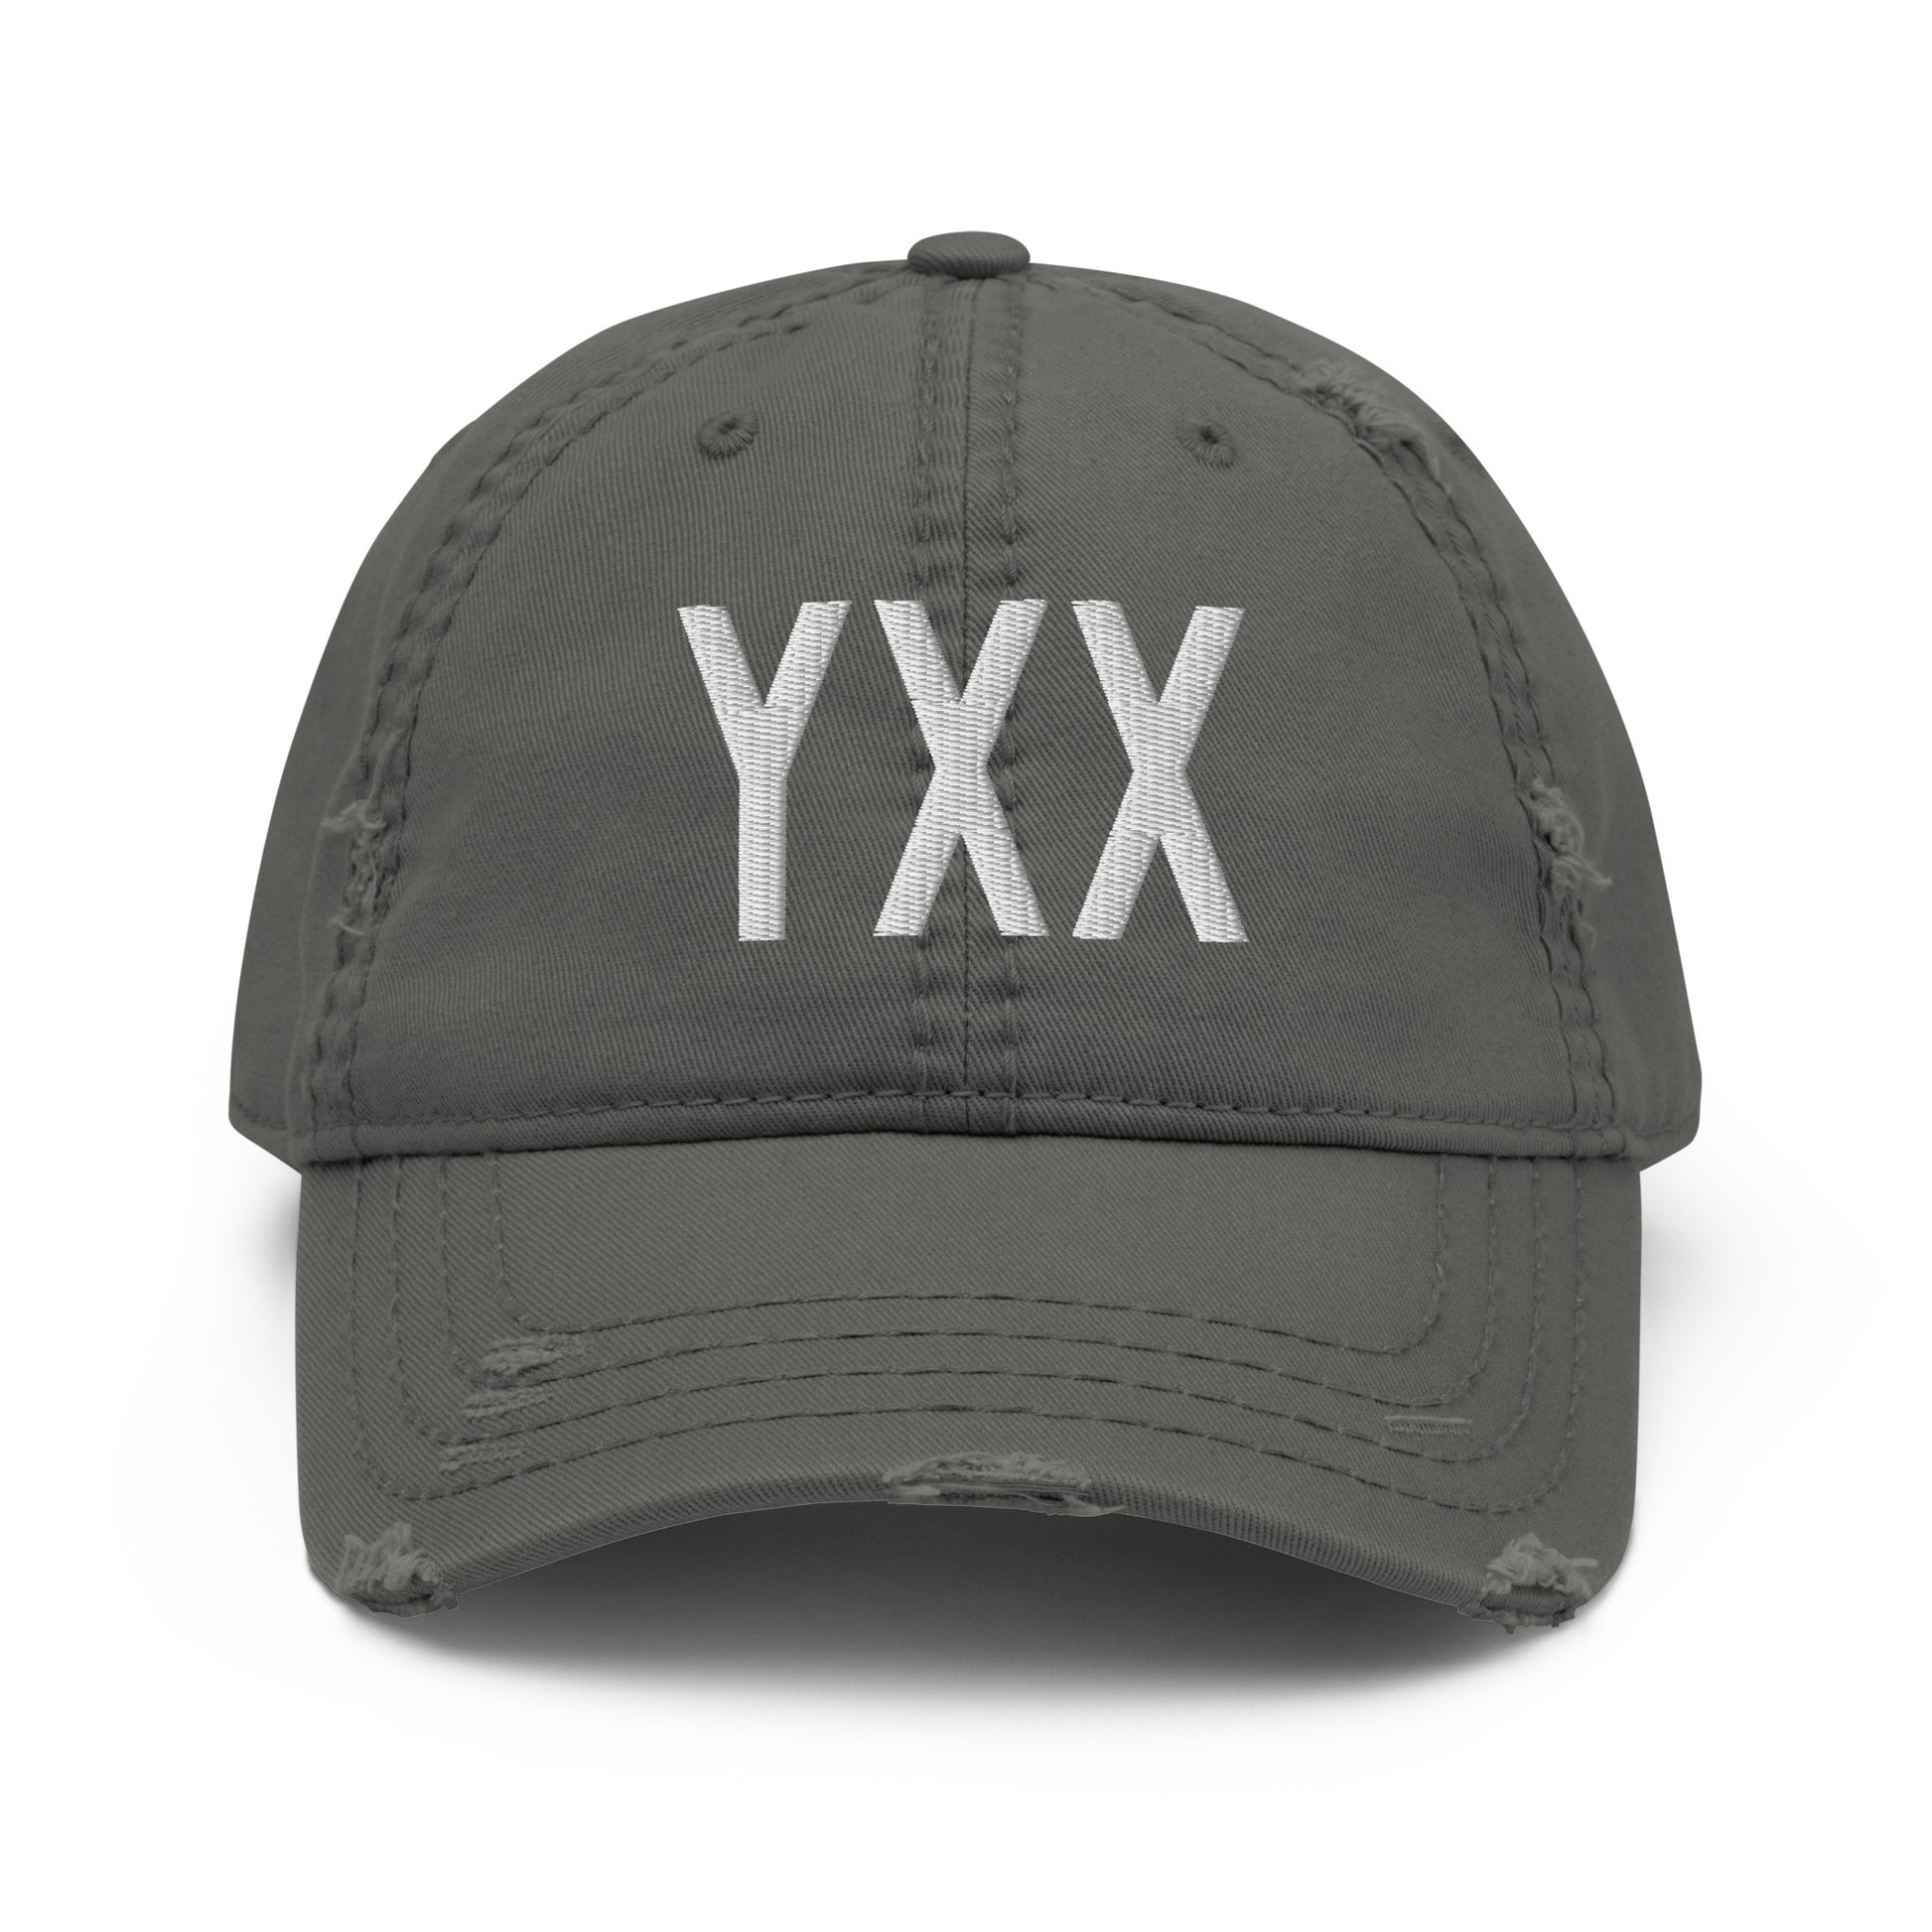 Airport Code Distressed Hat - White • YXX Abbotsford • YHM Designs - Image 15